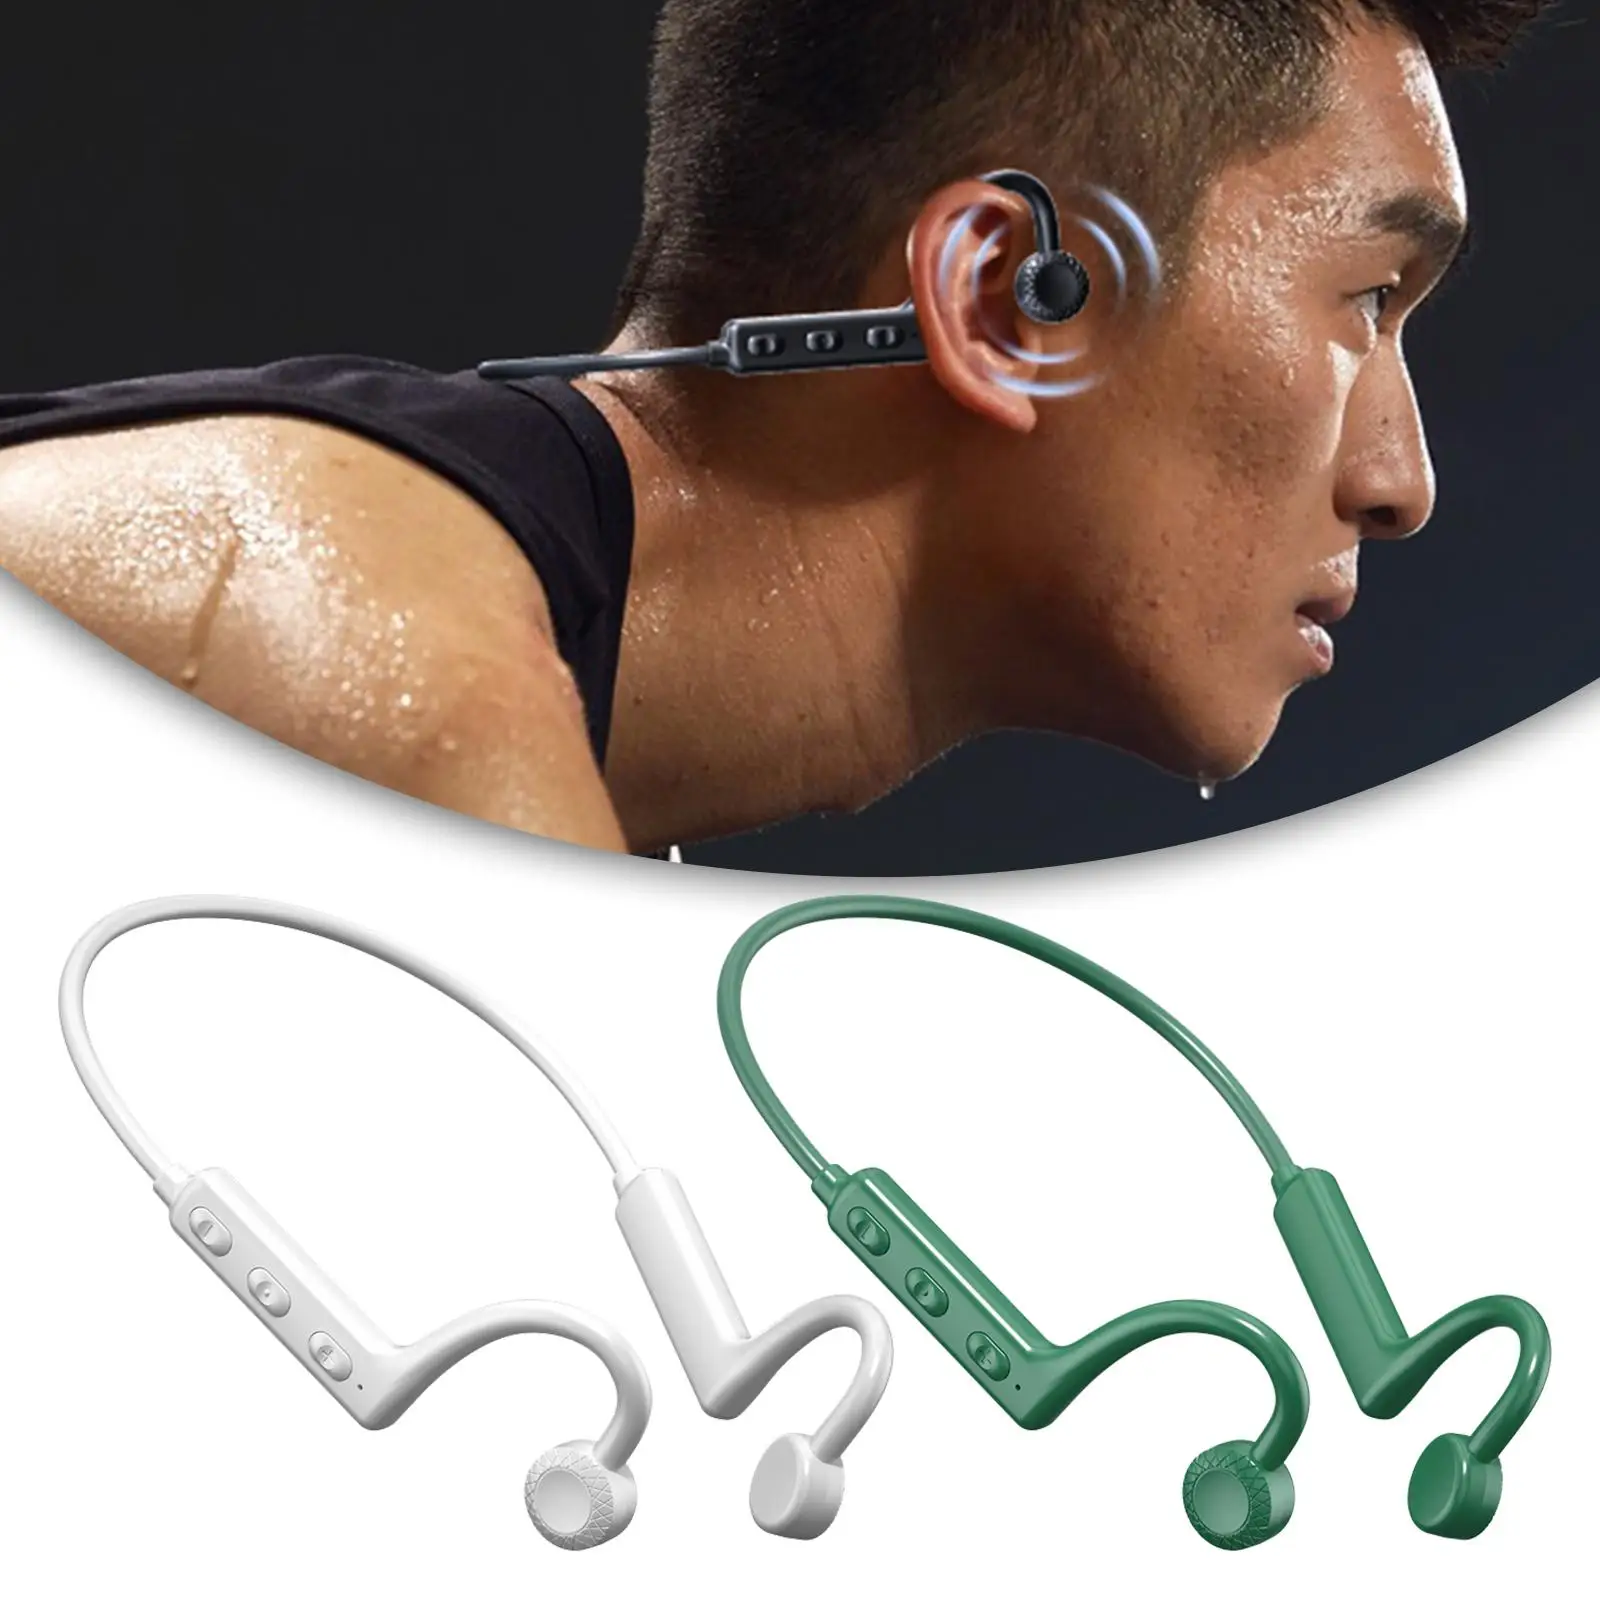 Bone Conduction Headphones Sweat Resistant Bluetooth 5.1 IPX5 Waterproof Open Ear Headset for Running Driving Sports Workout